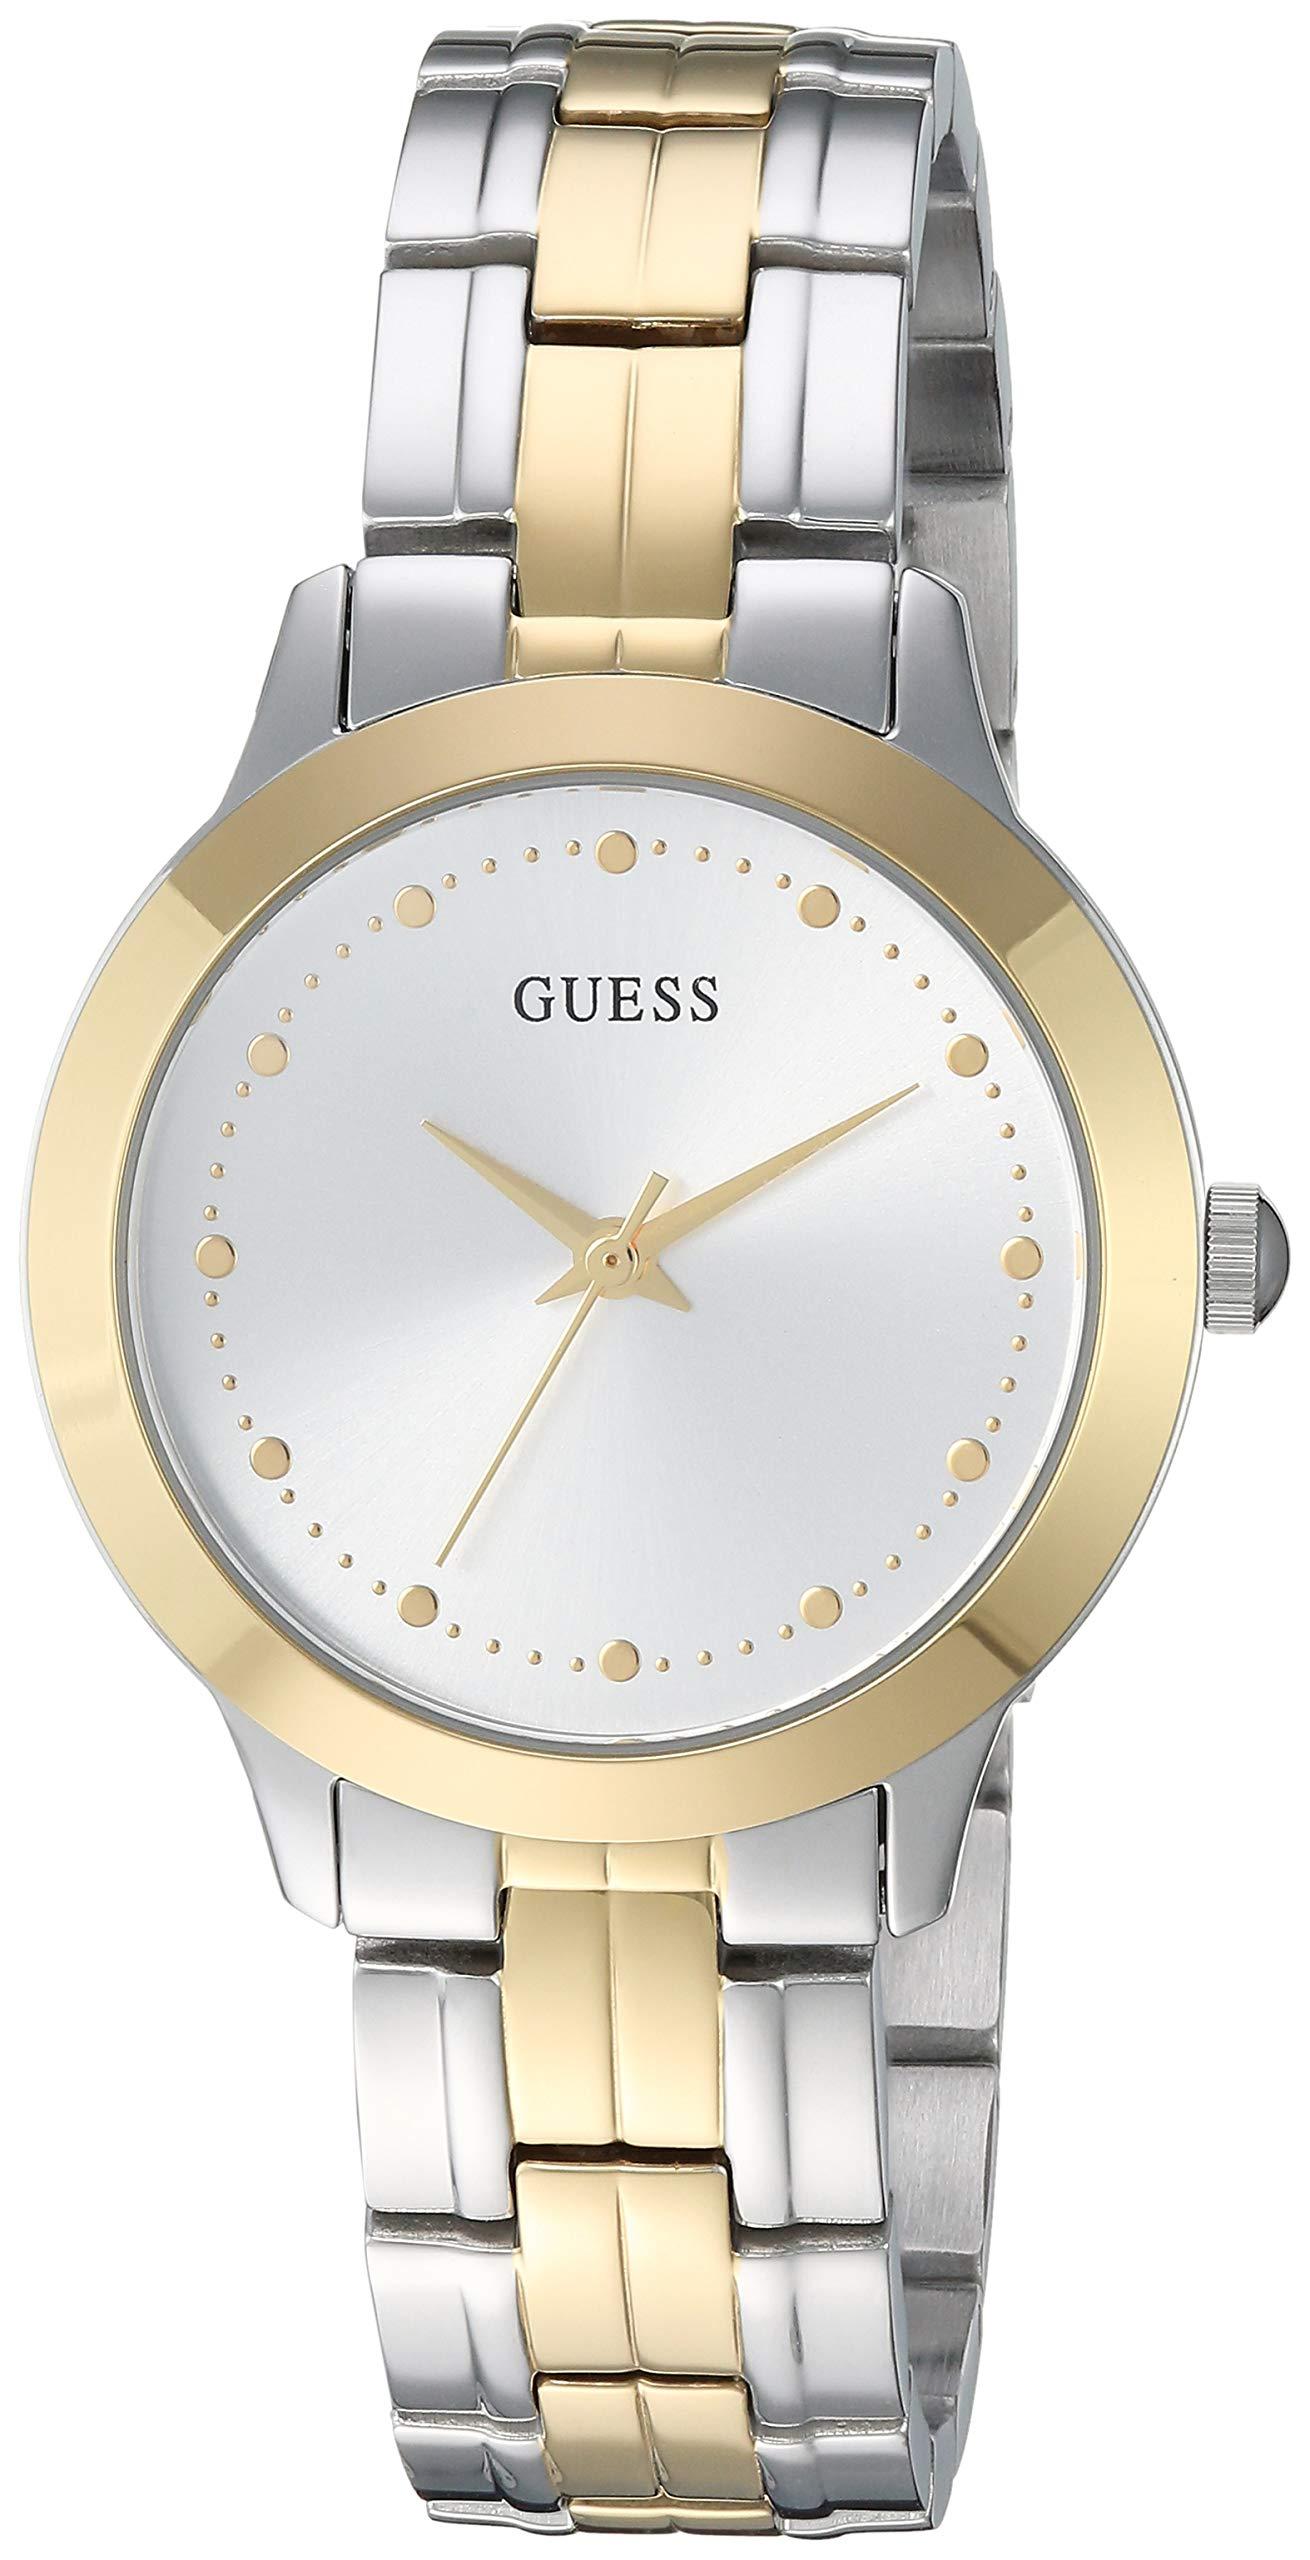 Guess Stainless Steel Japanese Quartz Watch With Leather Strap, Brown, 16  (model: U0884l9) in Black (Metallic) - Save 67% - Lyst